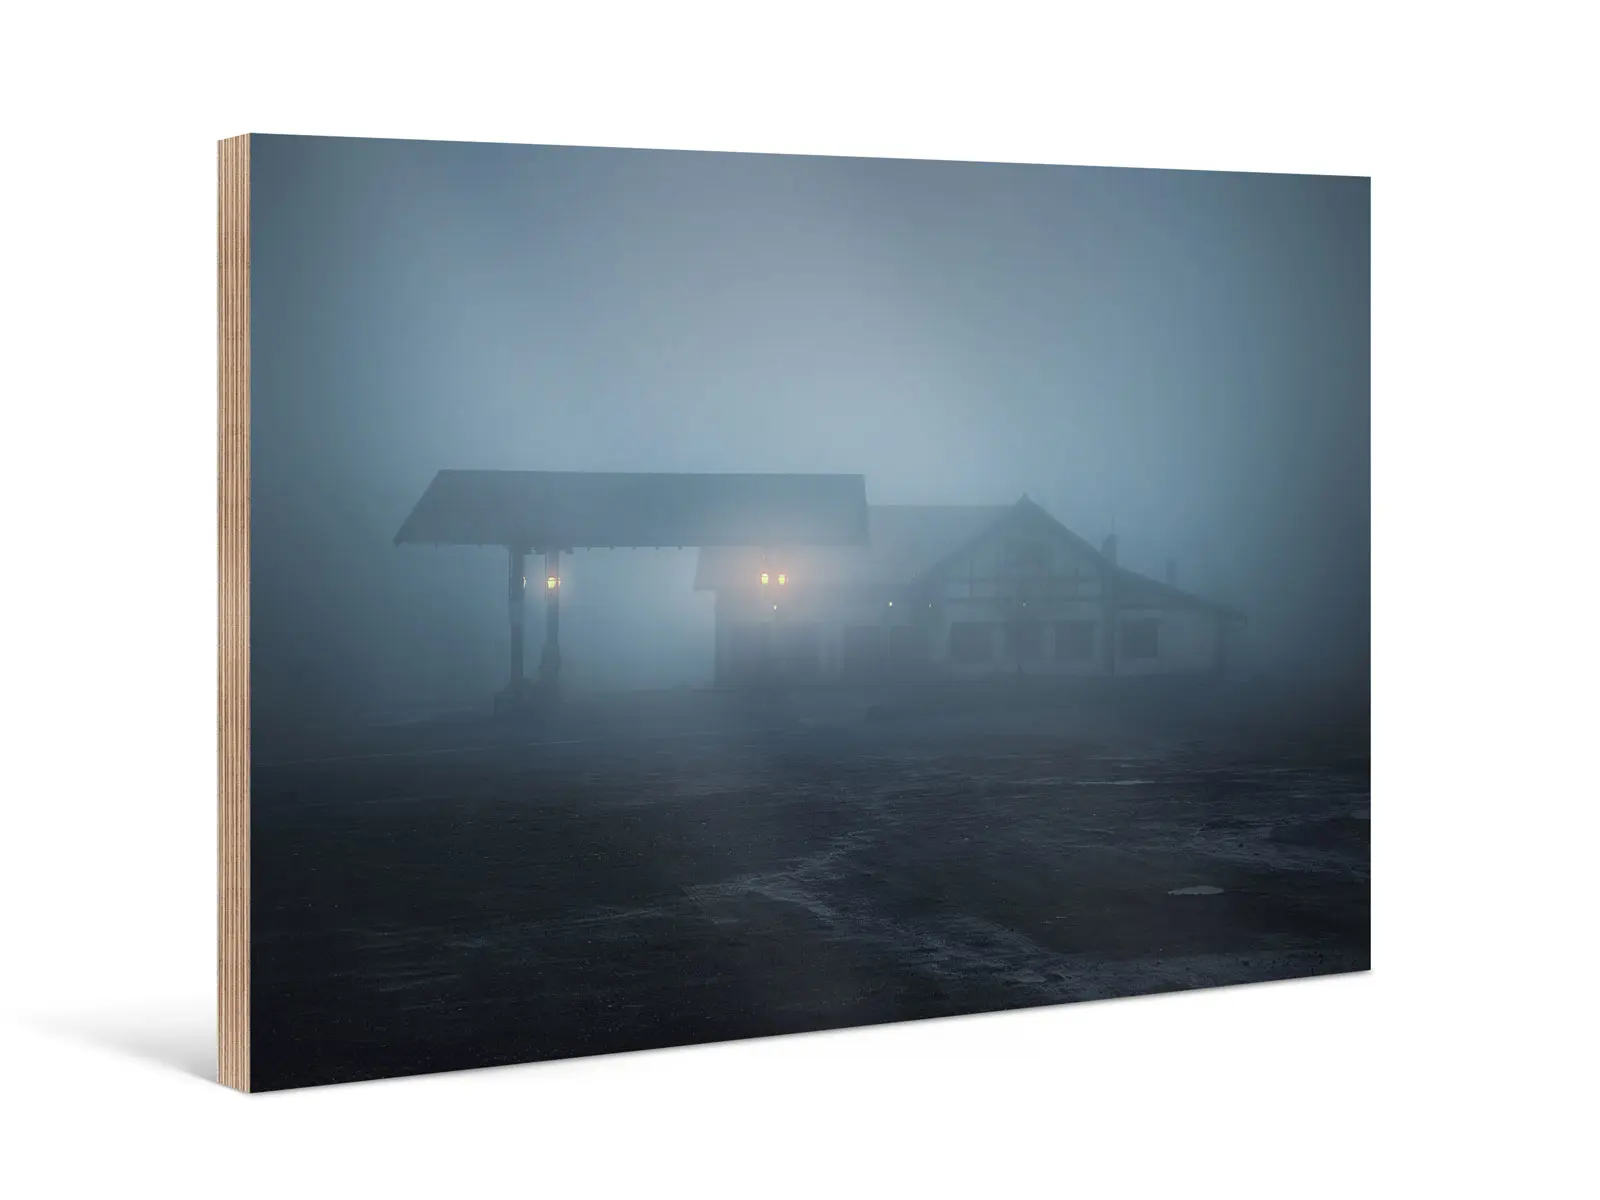 A restaurant can be seen shadowy in the fog on an Original Photo Print On Wood.